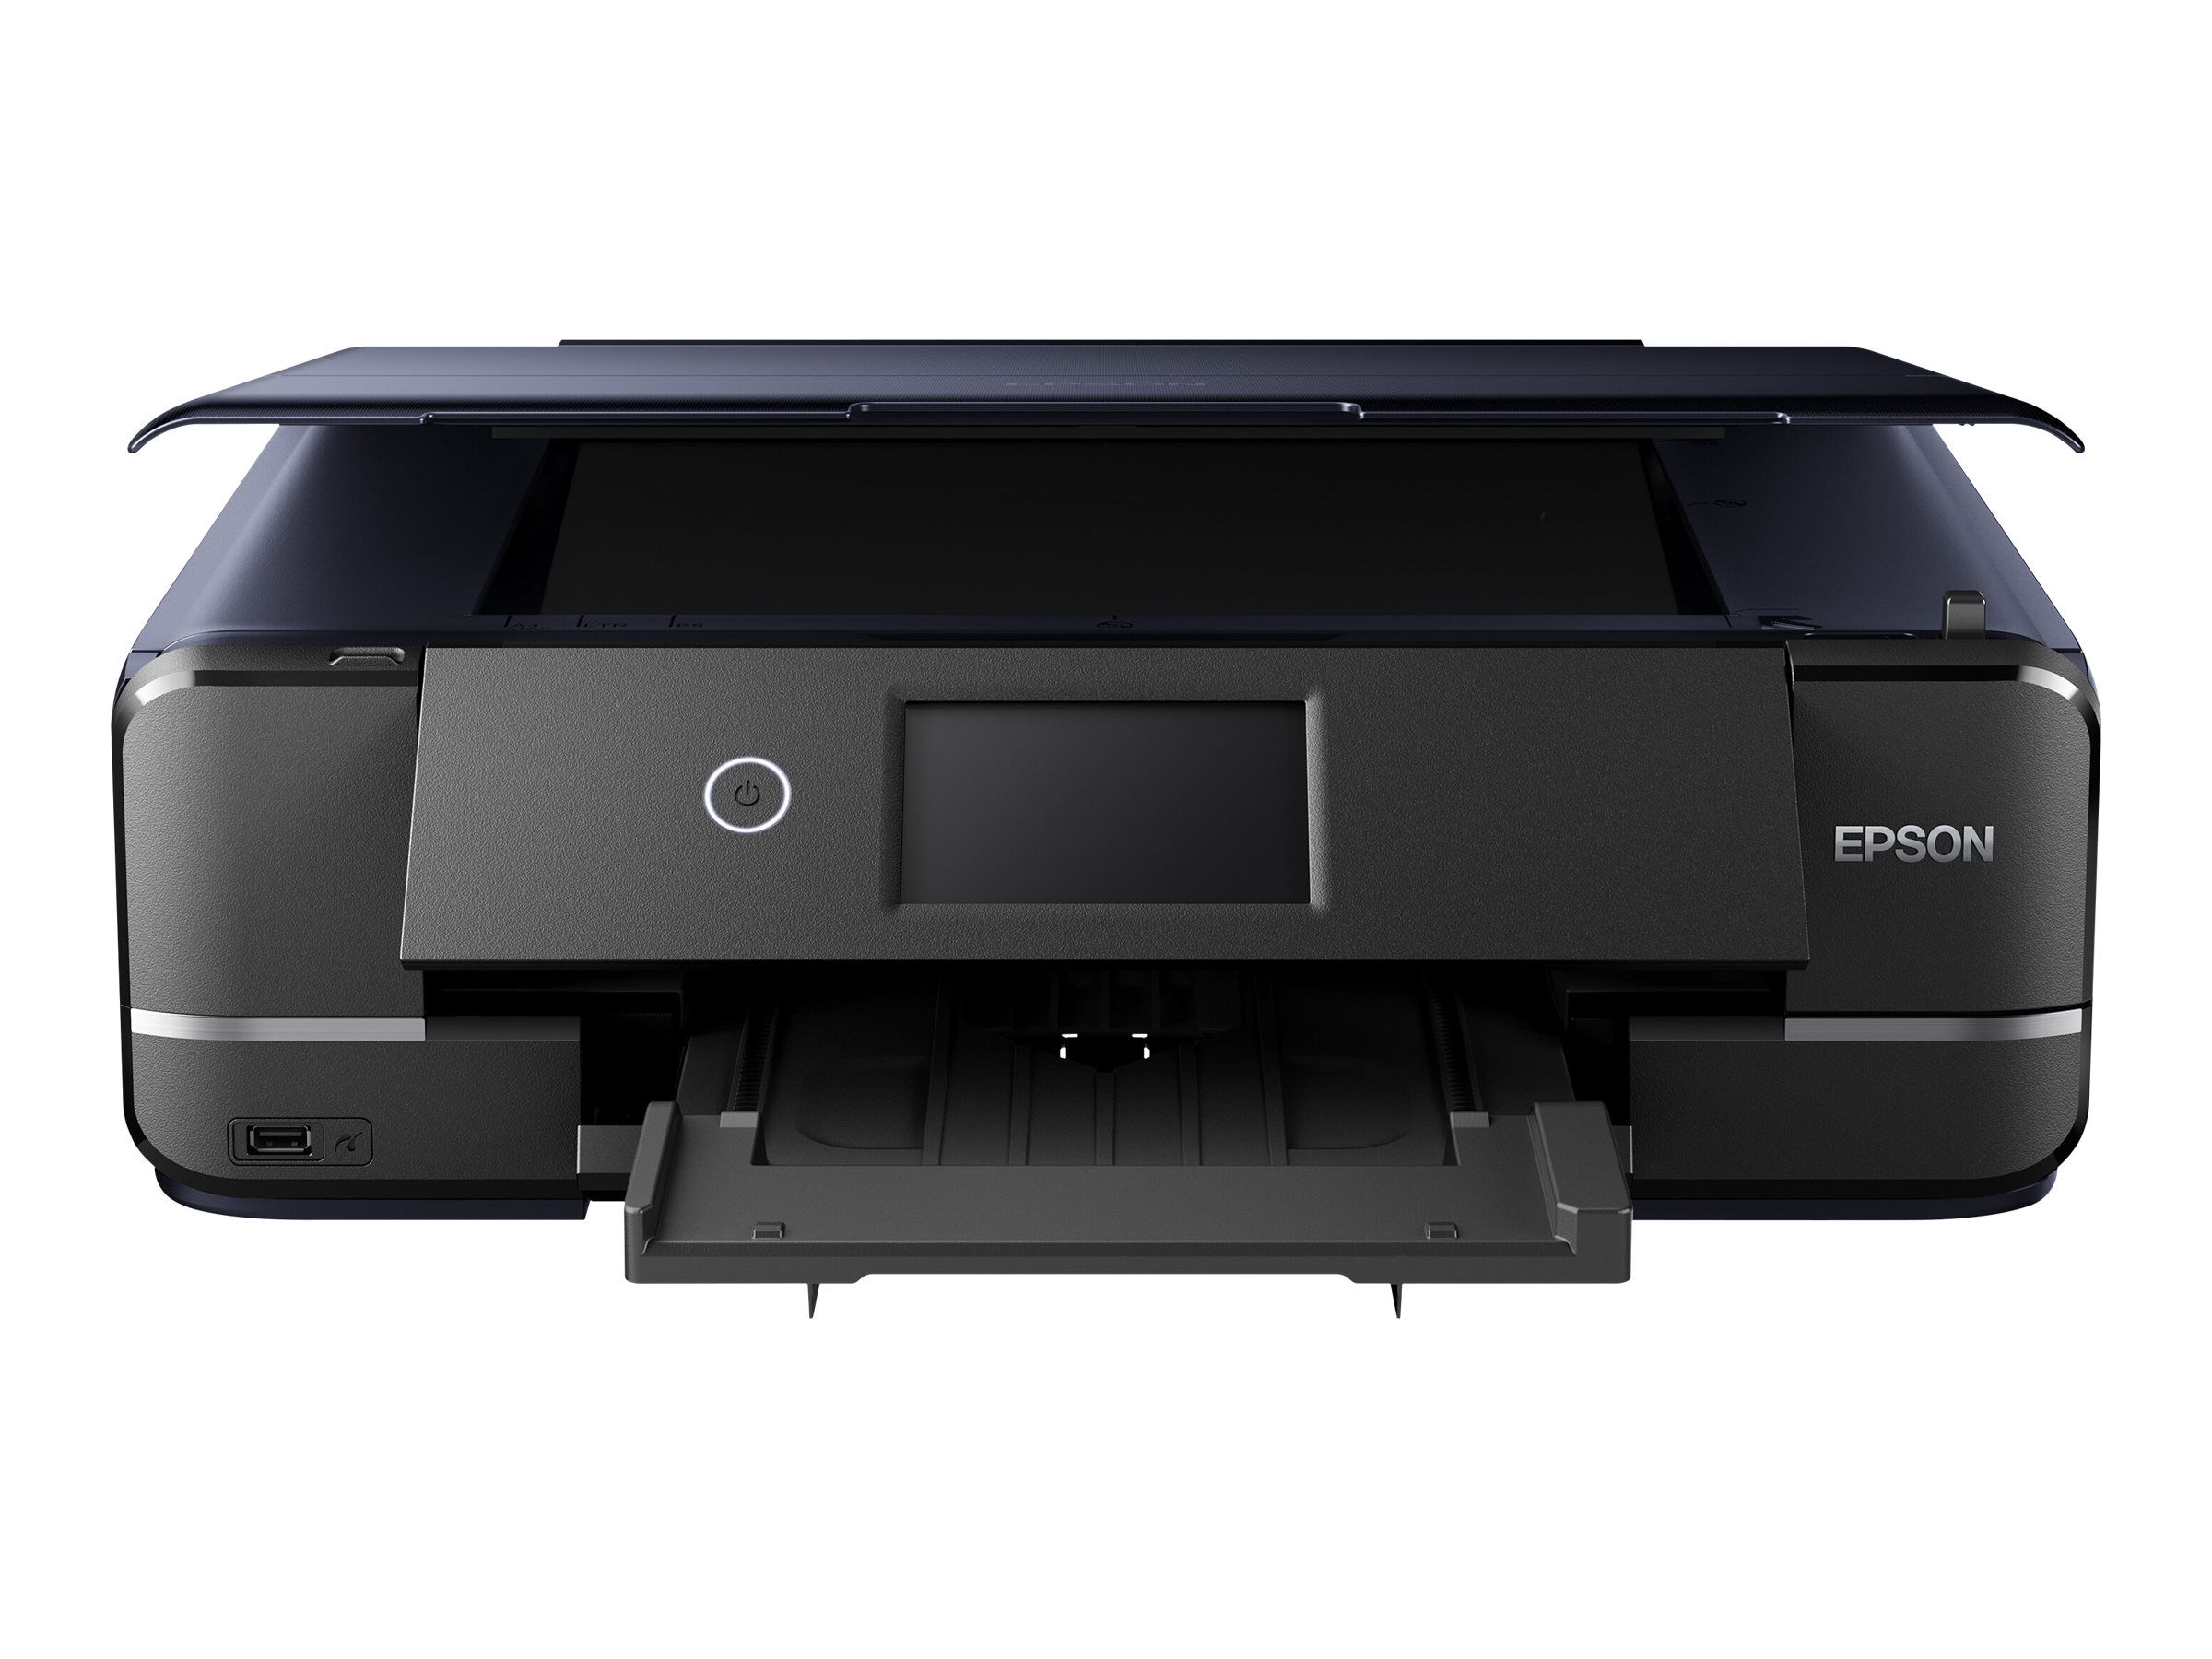 Epson Expression Photo XP-970 Small-in-One - Multifunktionsdrucker - Farbe - Tintenstrahl - A4 (210 x 297 mm)